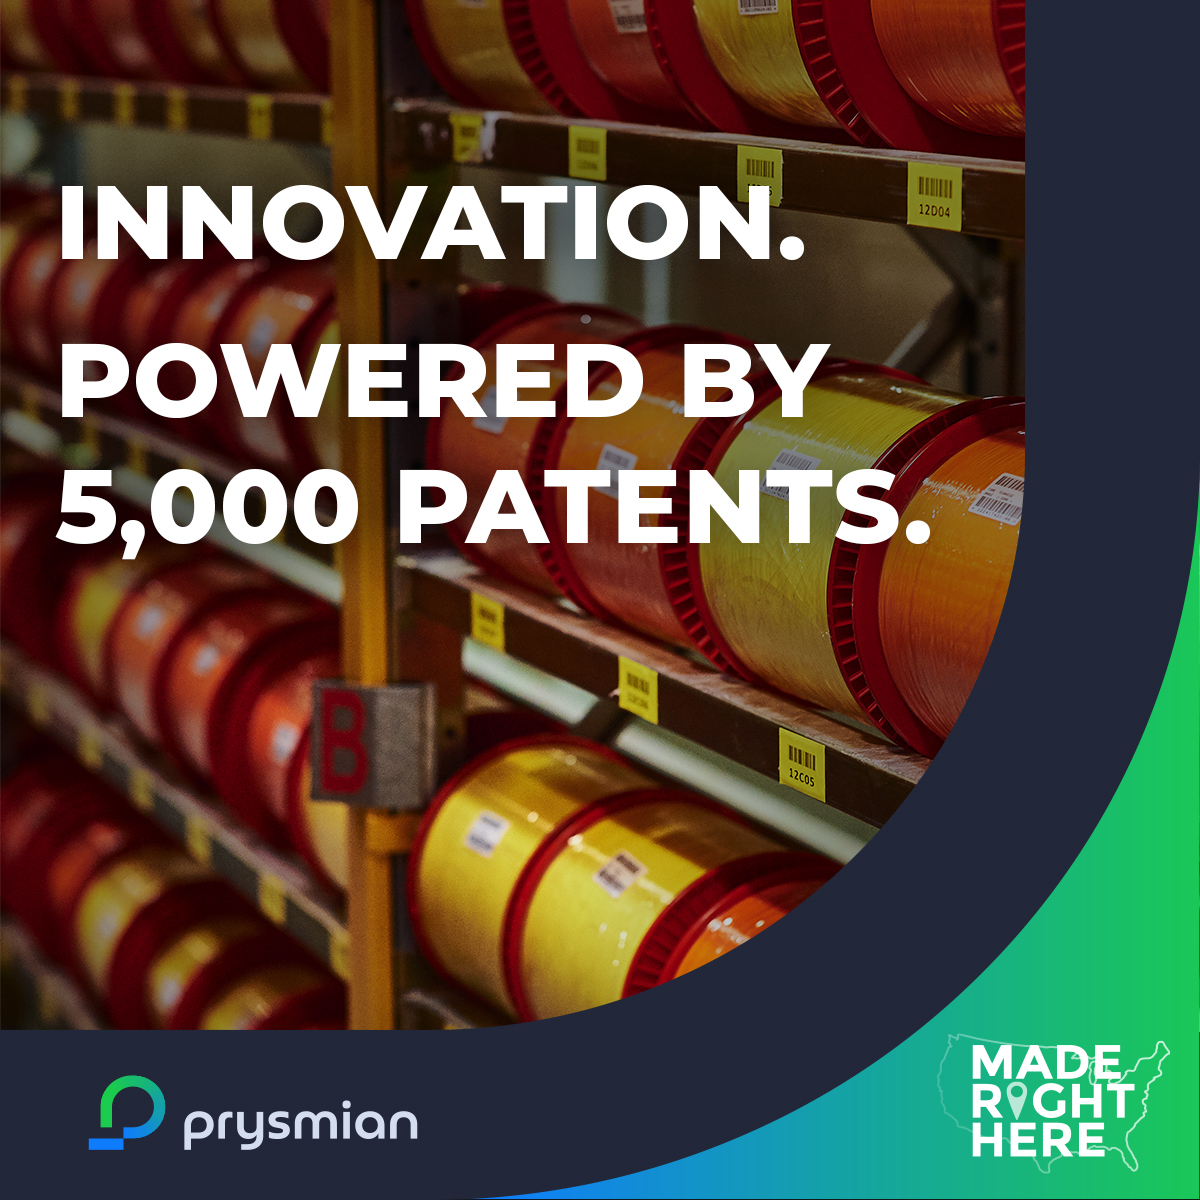 By choosing #PrysmianFiber for your wire and cable needs, your business also supports innovation and economic growth of products #MadeRightHere in North America. Backed by 5,000+ patents, we’re able to deliver new technologies, lower network costs and ensure quality and…